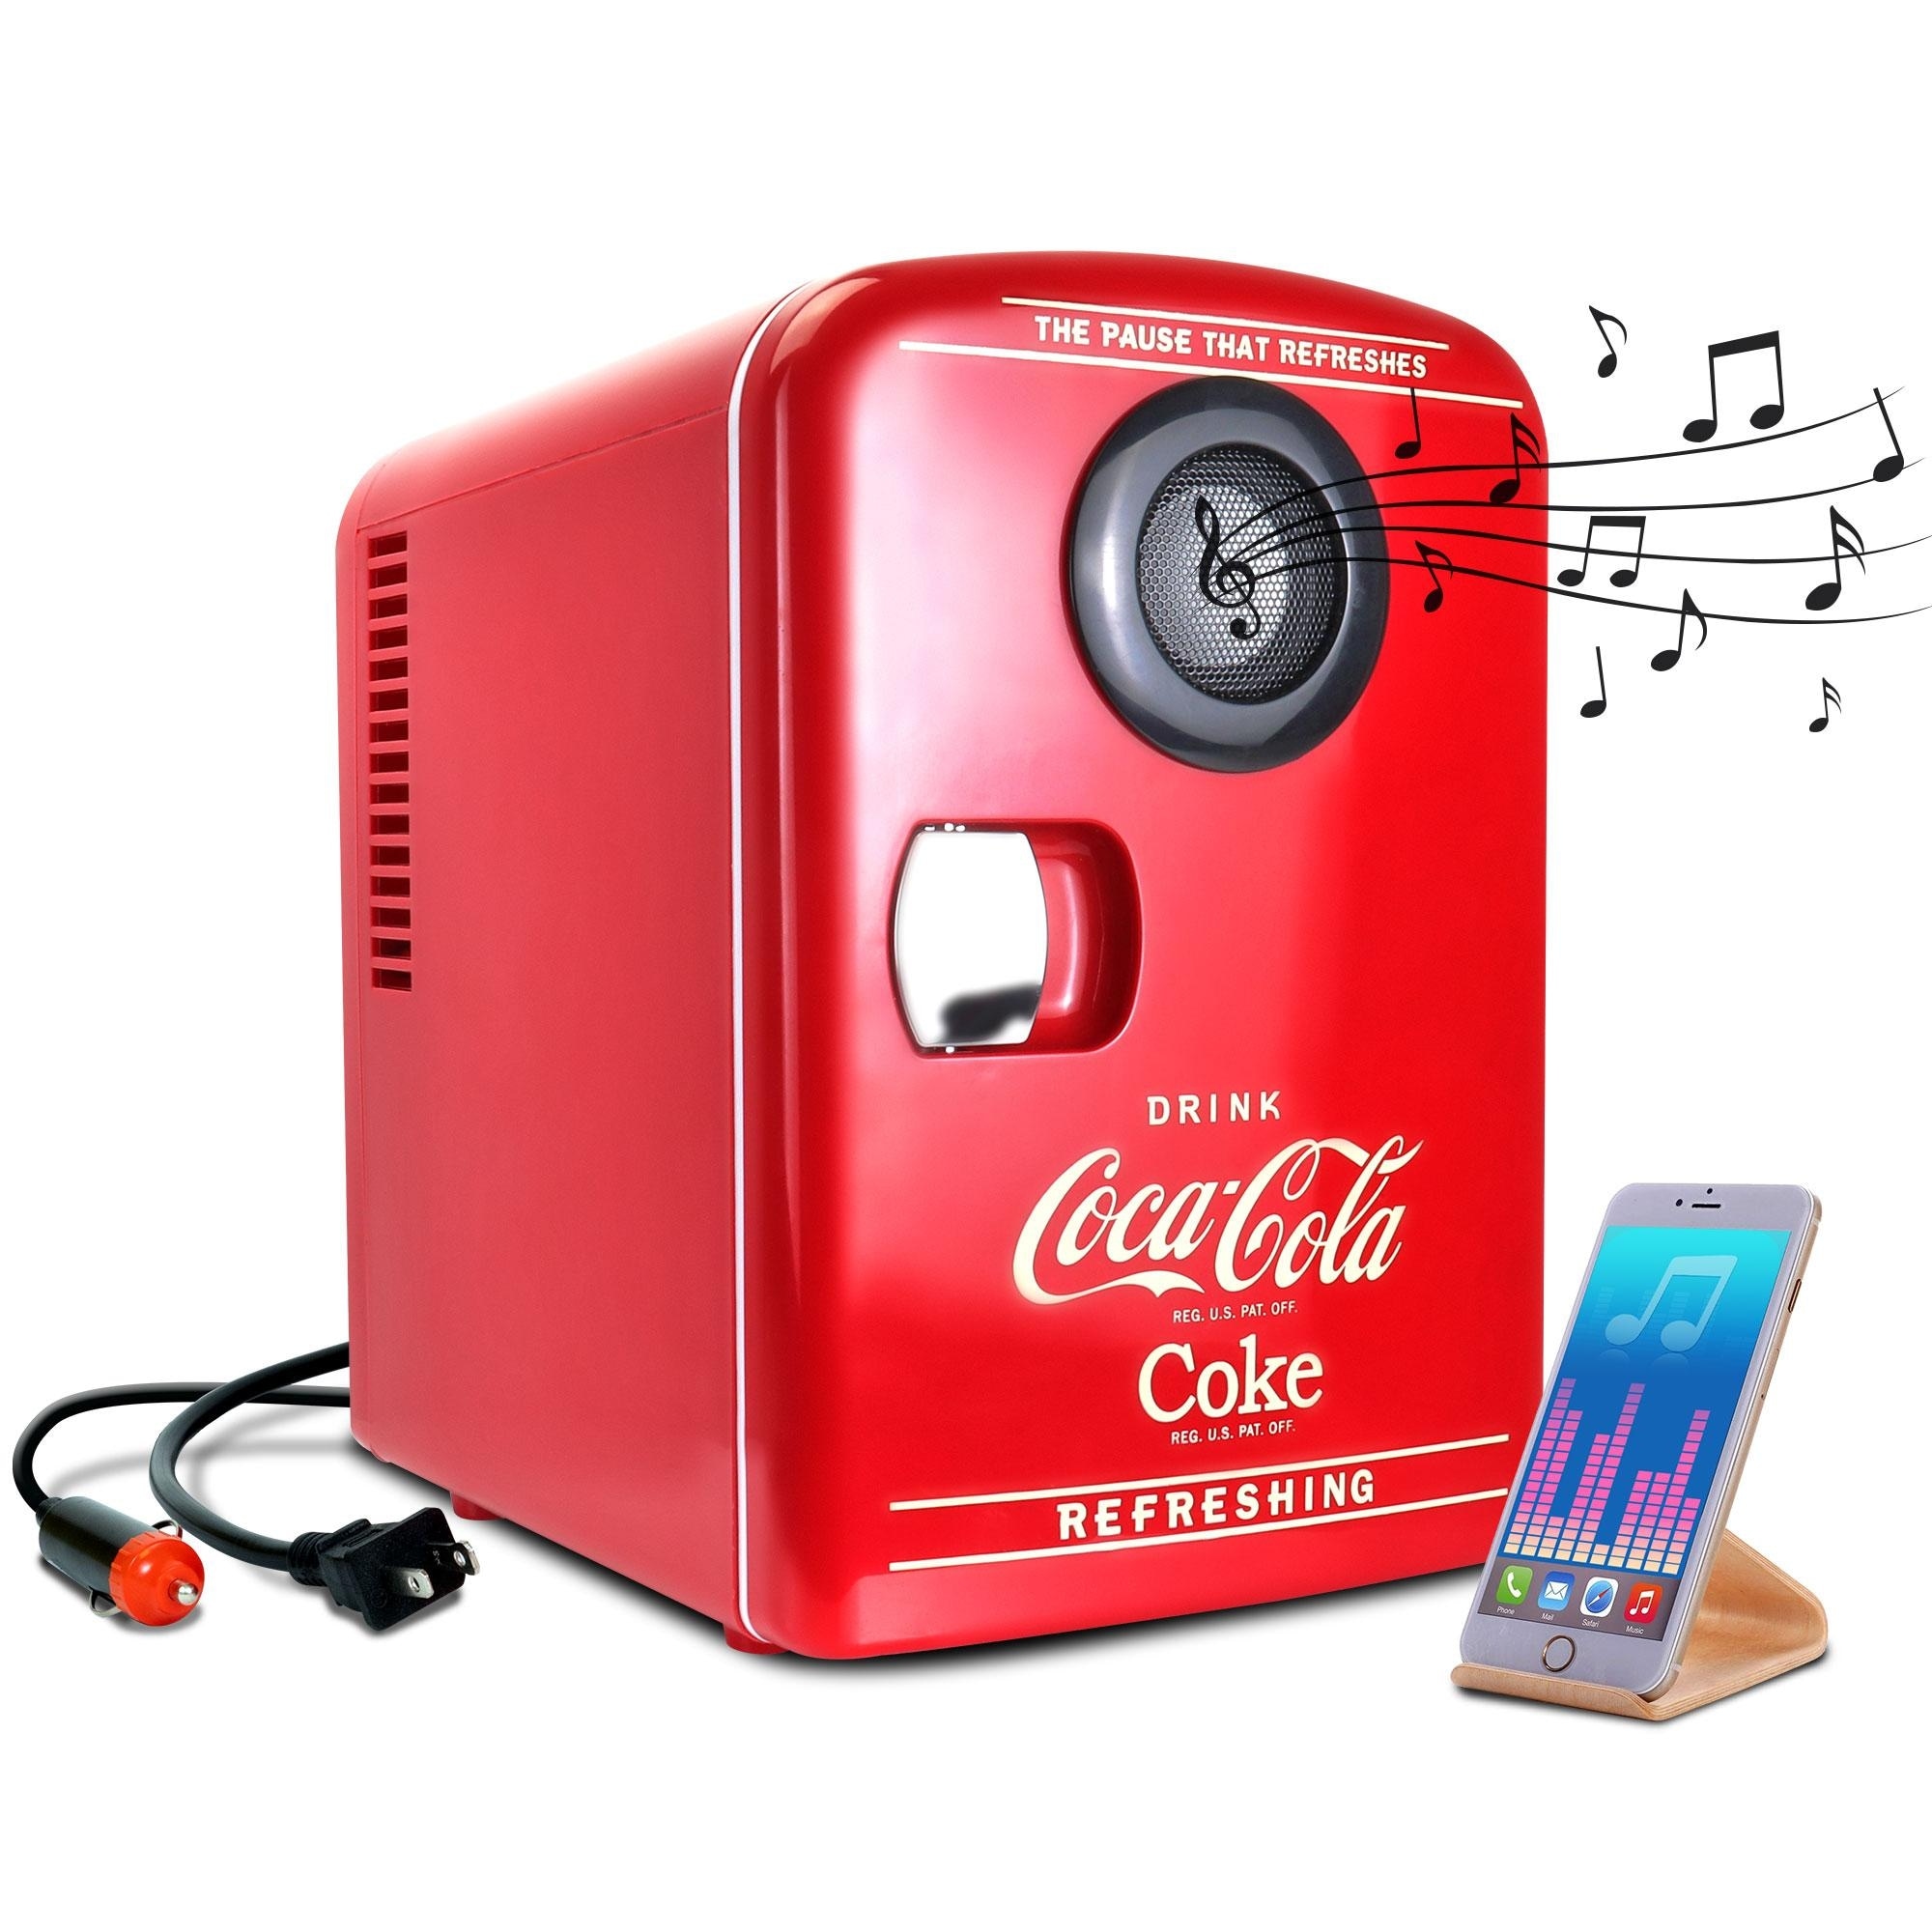 https://ak1.ostkcdn.com/images/products/is/images/direct/f8cd796b8151f1d6cf335fb8c144c9db2a6f8163/Coca-Cola-4L-Cooler-Warmer-w--Bluetooth-Speaker%2C-12V-DC-and-110V-AC-Cords%2C-6-Can-Mini-Fridge%2C-Red.jpg